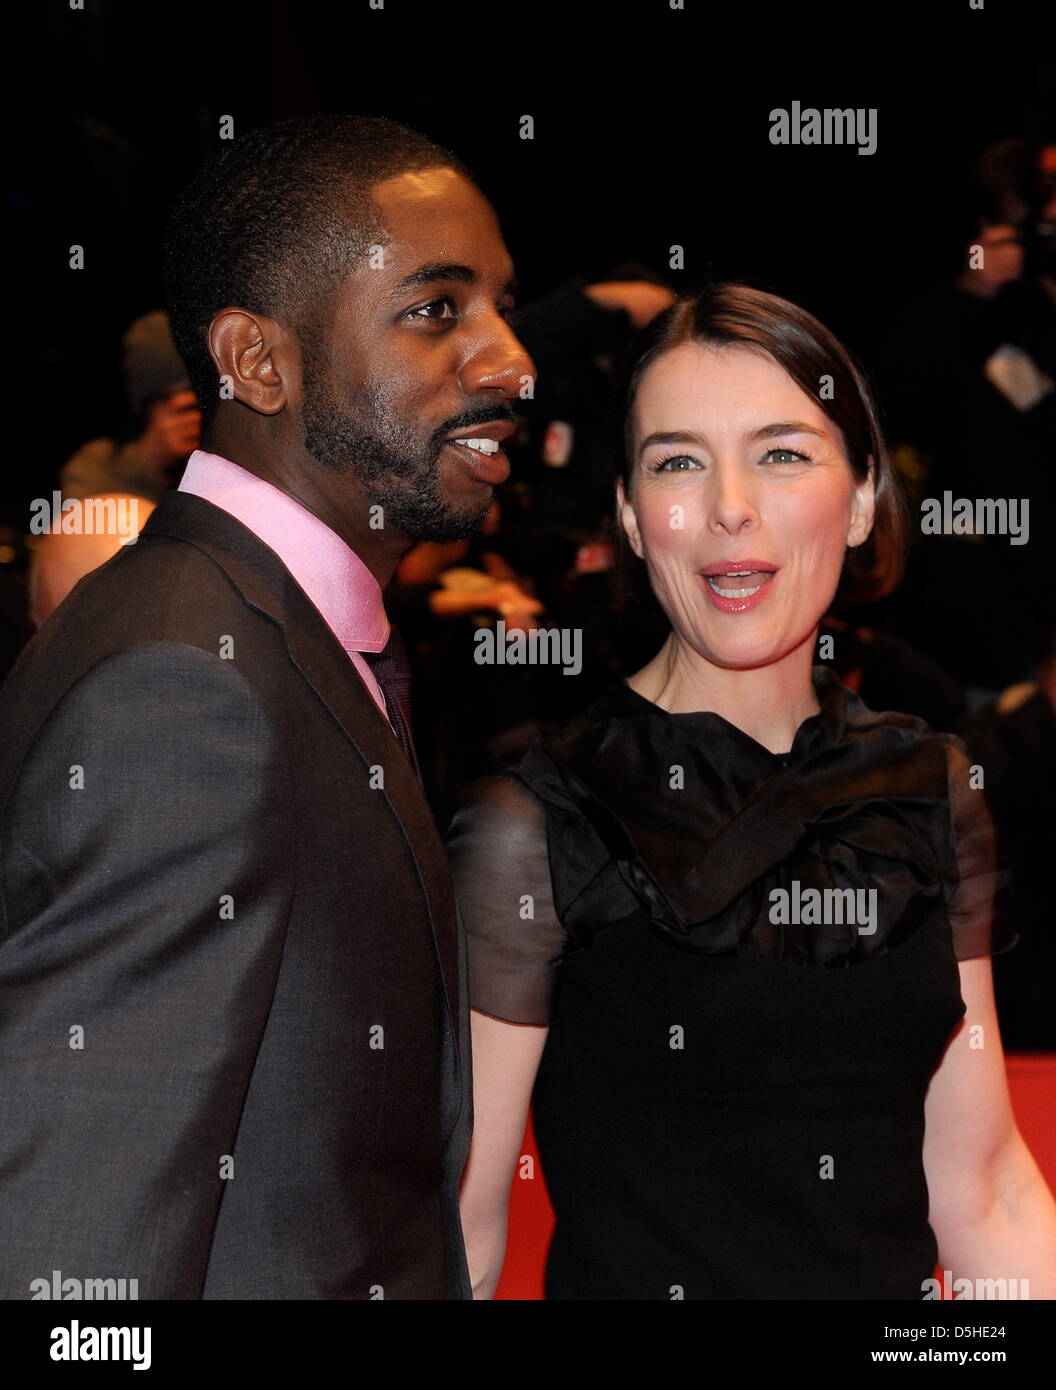 British actress Olivia Williams and her husband Rashan Stone arrive for the premiere of the film 'The Ghost Writer' during the 60th Berlinale International Film Festival in Berlin, Germany on Friday 12 February 2010. The festival runs until 21 Febuary 2010. Photo: Jens Kalaene dpa/lbn  +++(c) dpa - Bildfunk+++ Stock Photo